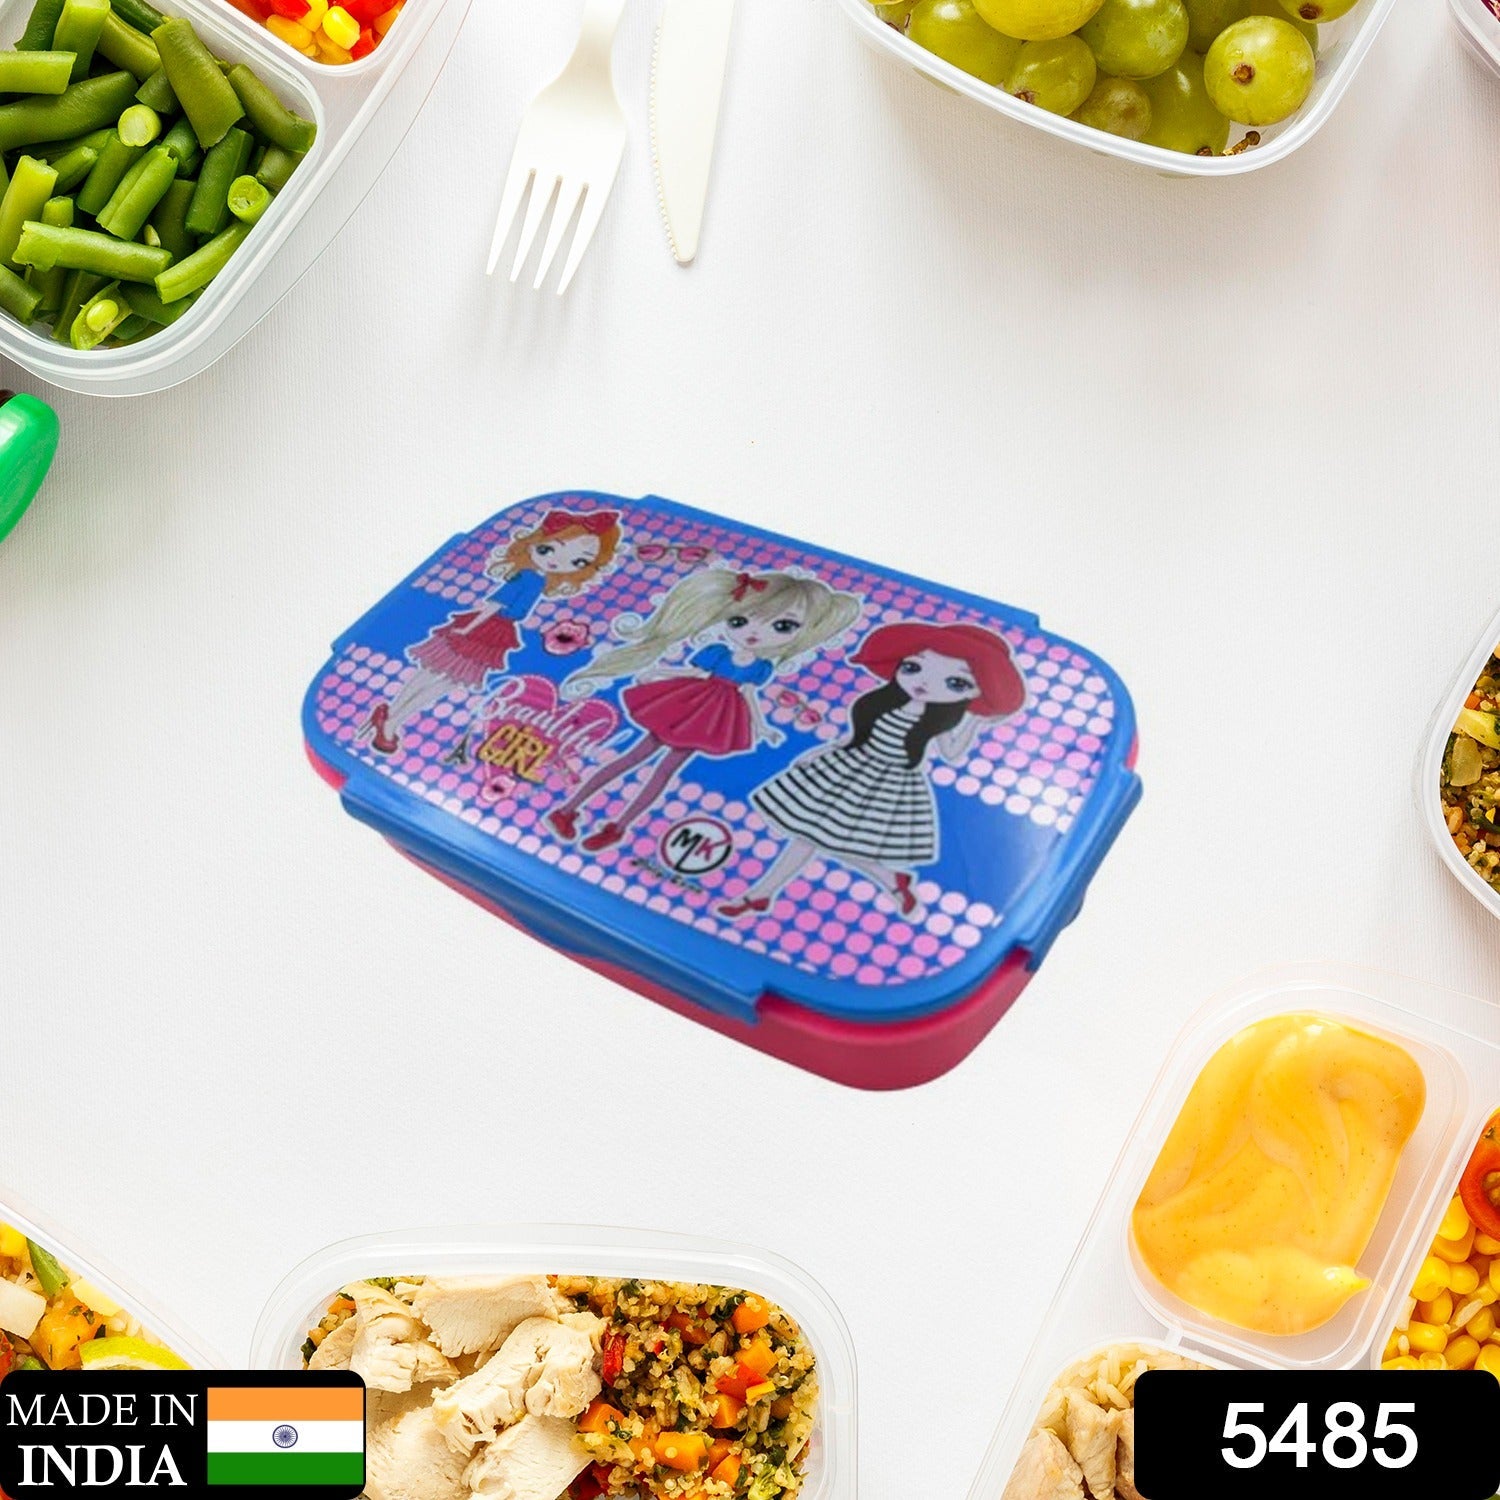 5485 CARTOON PRINTED PLASTIC LUNCH BOX WITH INSIDE SMALL BOX & SPOON FOR KIDS, AIR TIGHT LUNCH TIFFIN BOX FOR GIRLS BOYS, FOOD CONTAINER, SPECIALLY DESIGNED FOR SCHOOL GOING BOYS AND GIRLS